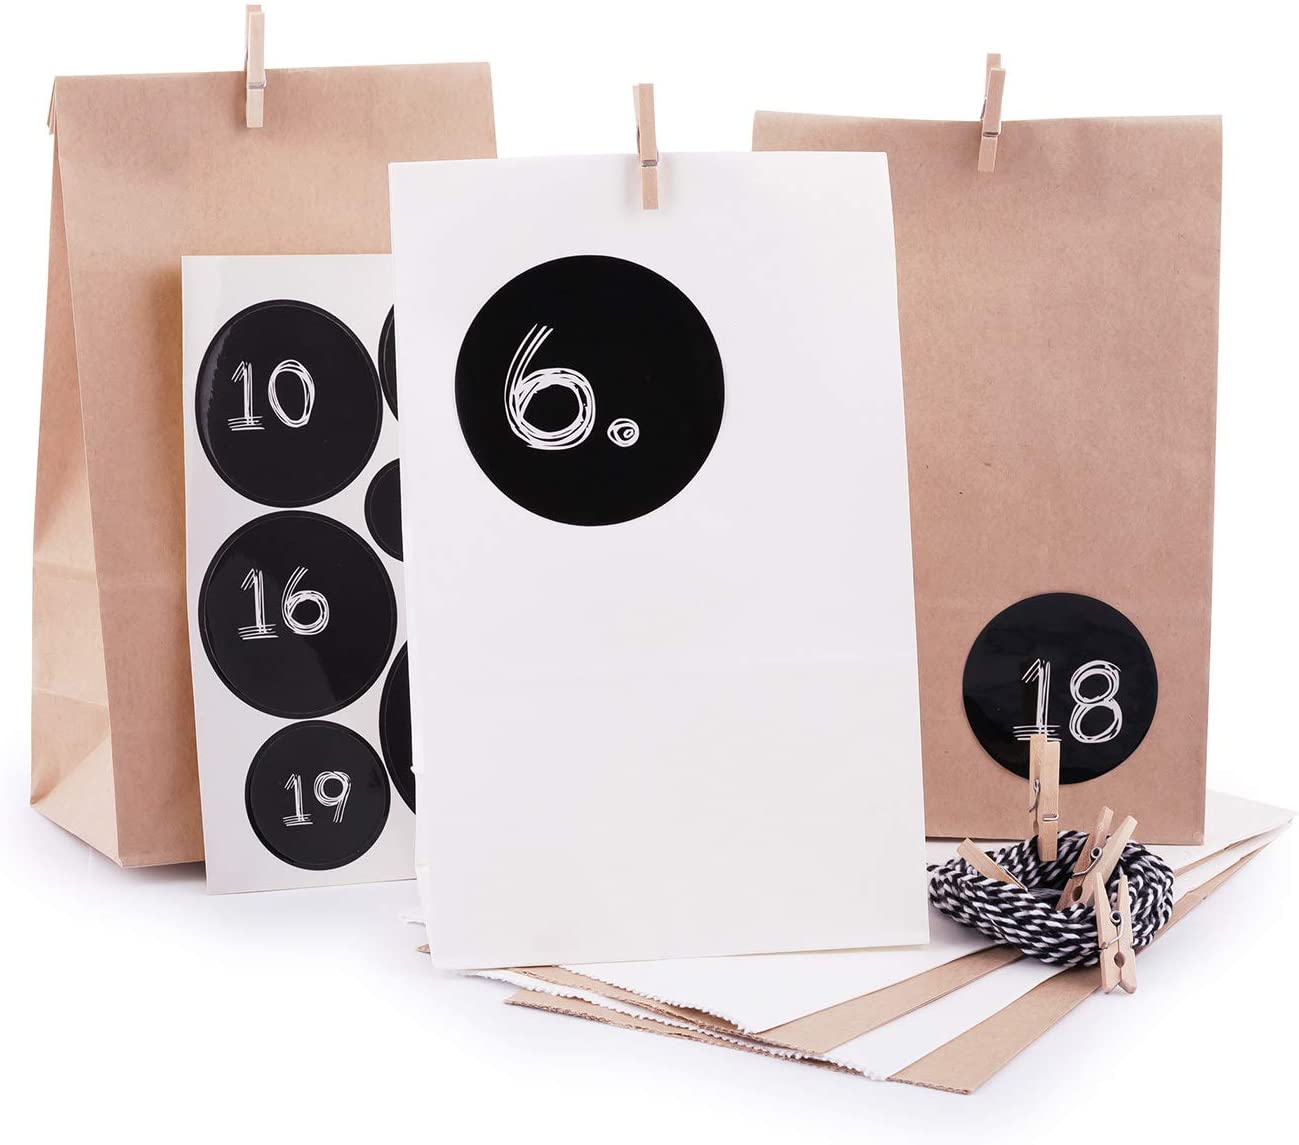 Pajoma Advent Calendar for Filling Modern 24 Kraft Paper Bags White Brown Gift Bags Christmas Calendar Craft Set Including Number Stickers, String and Clips